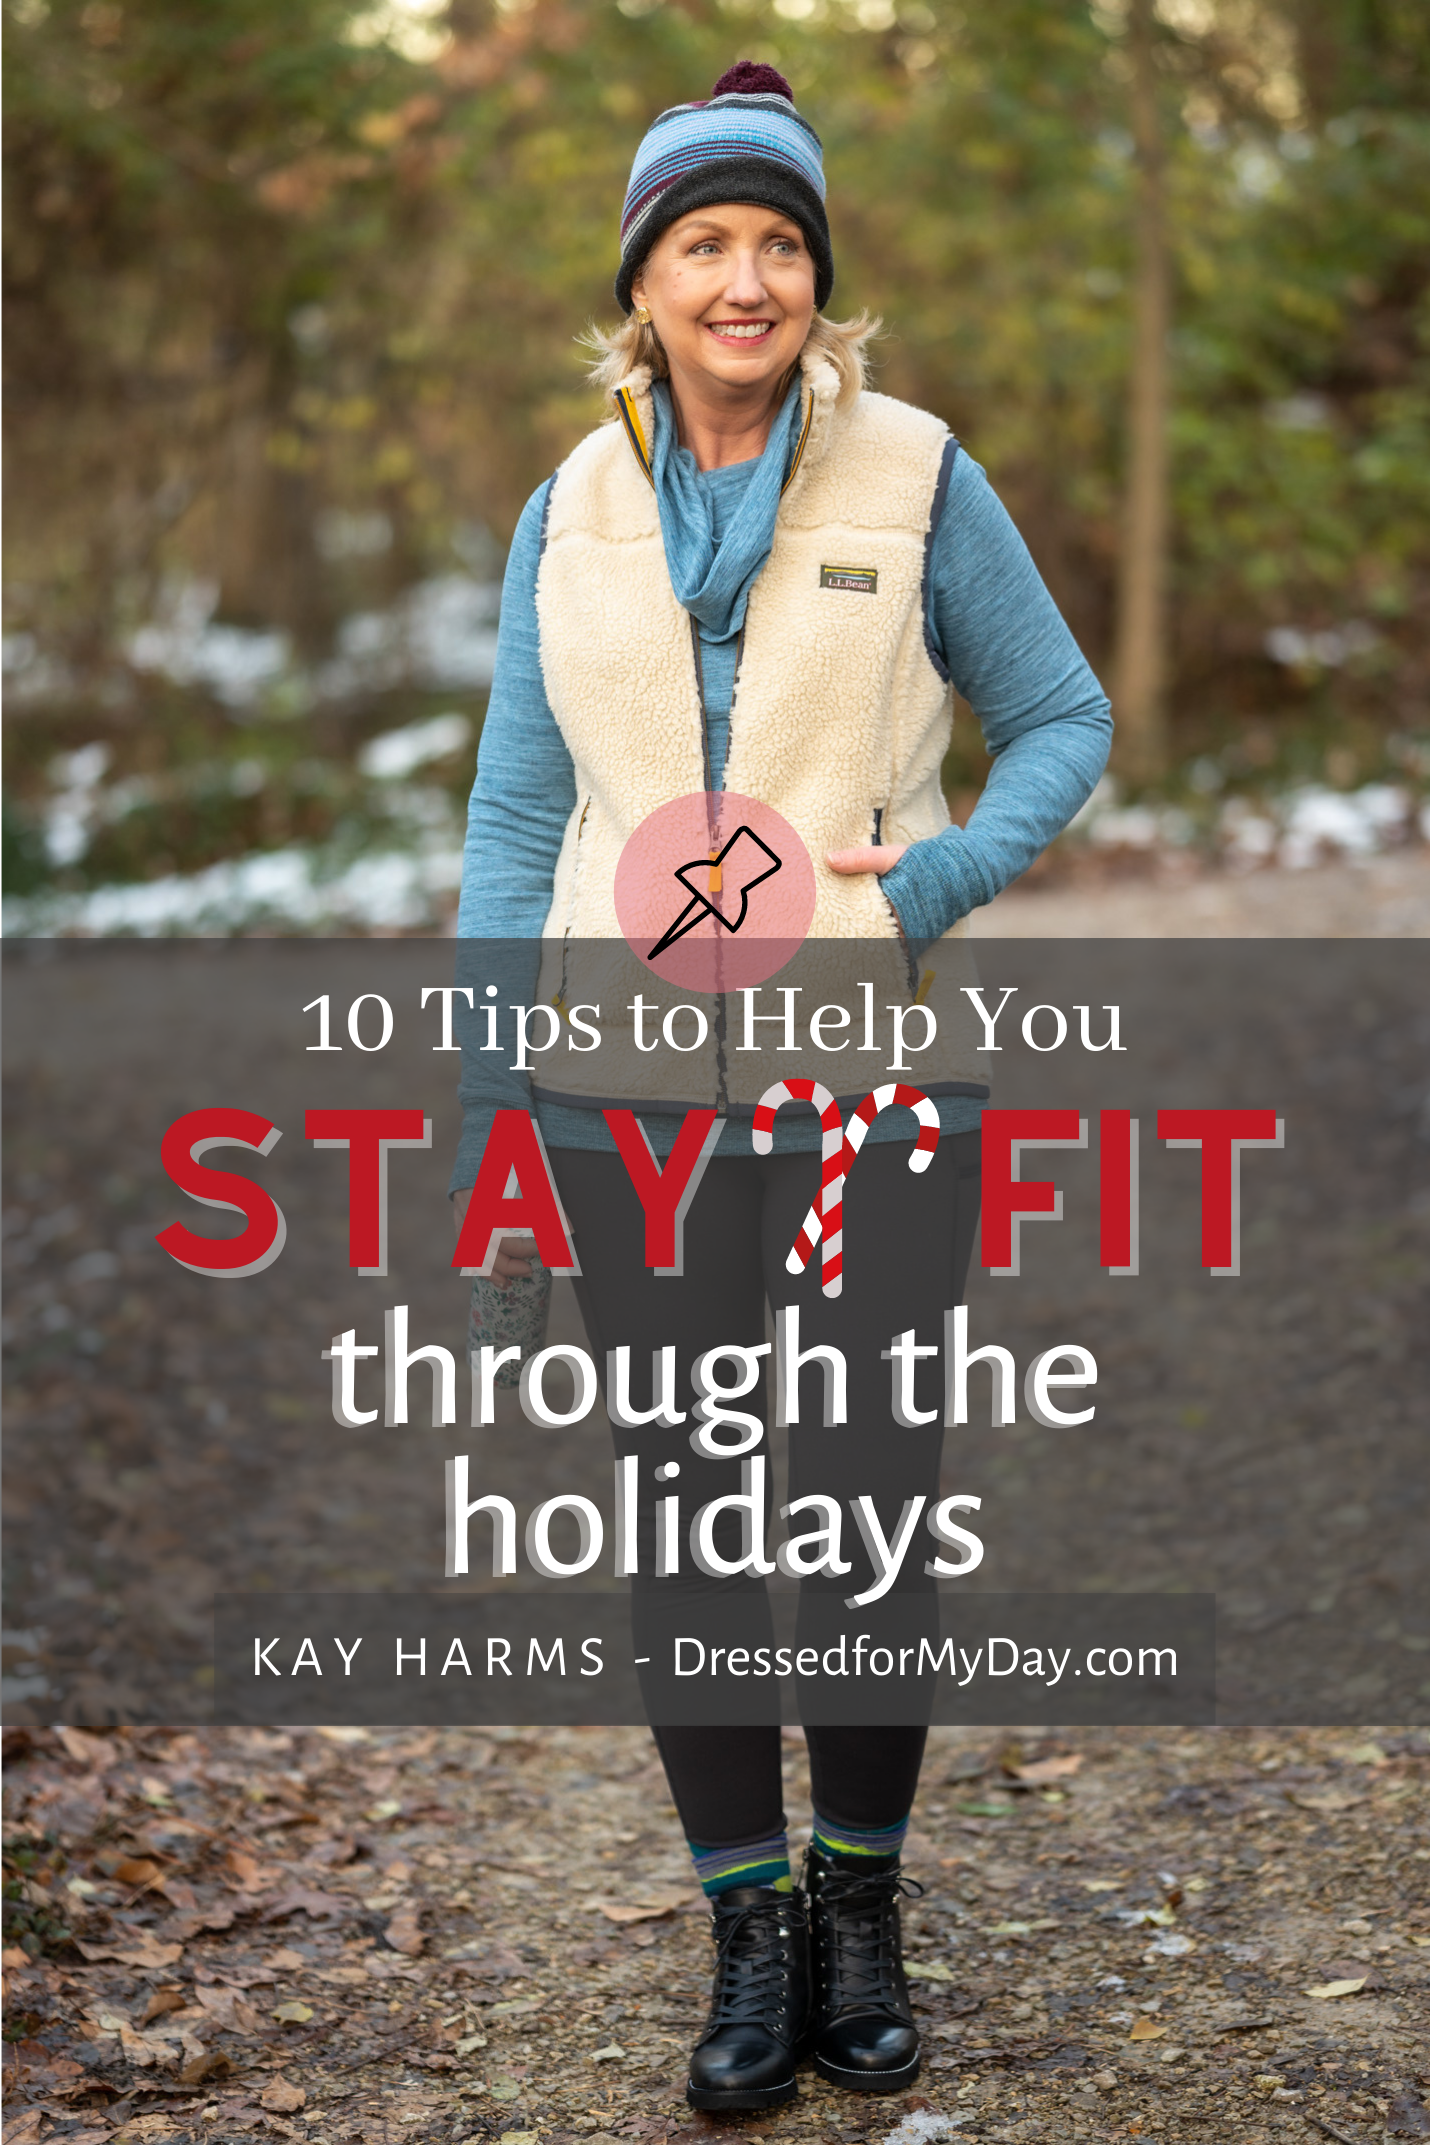 10 Tips to Help You Stay Fit through the holidays (1)